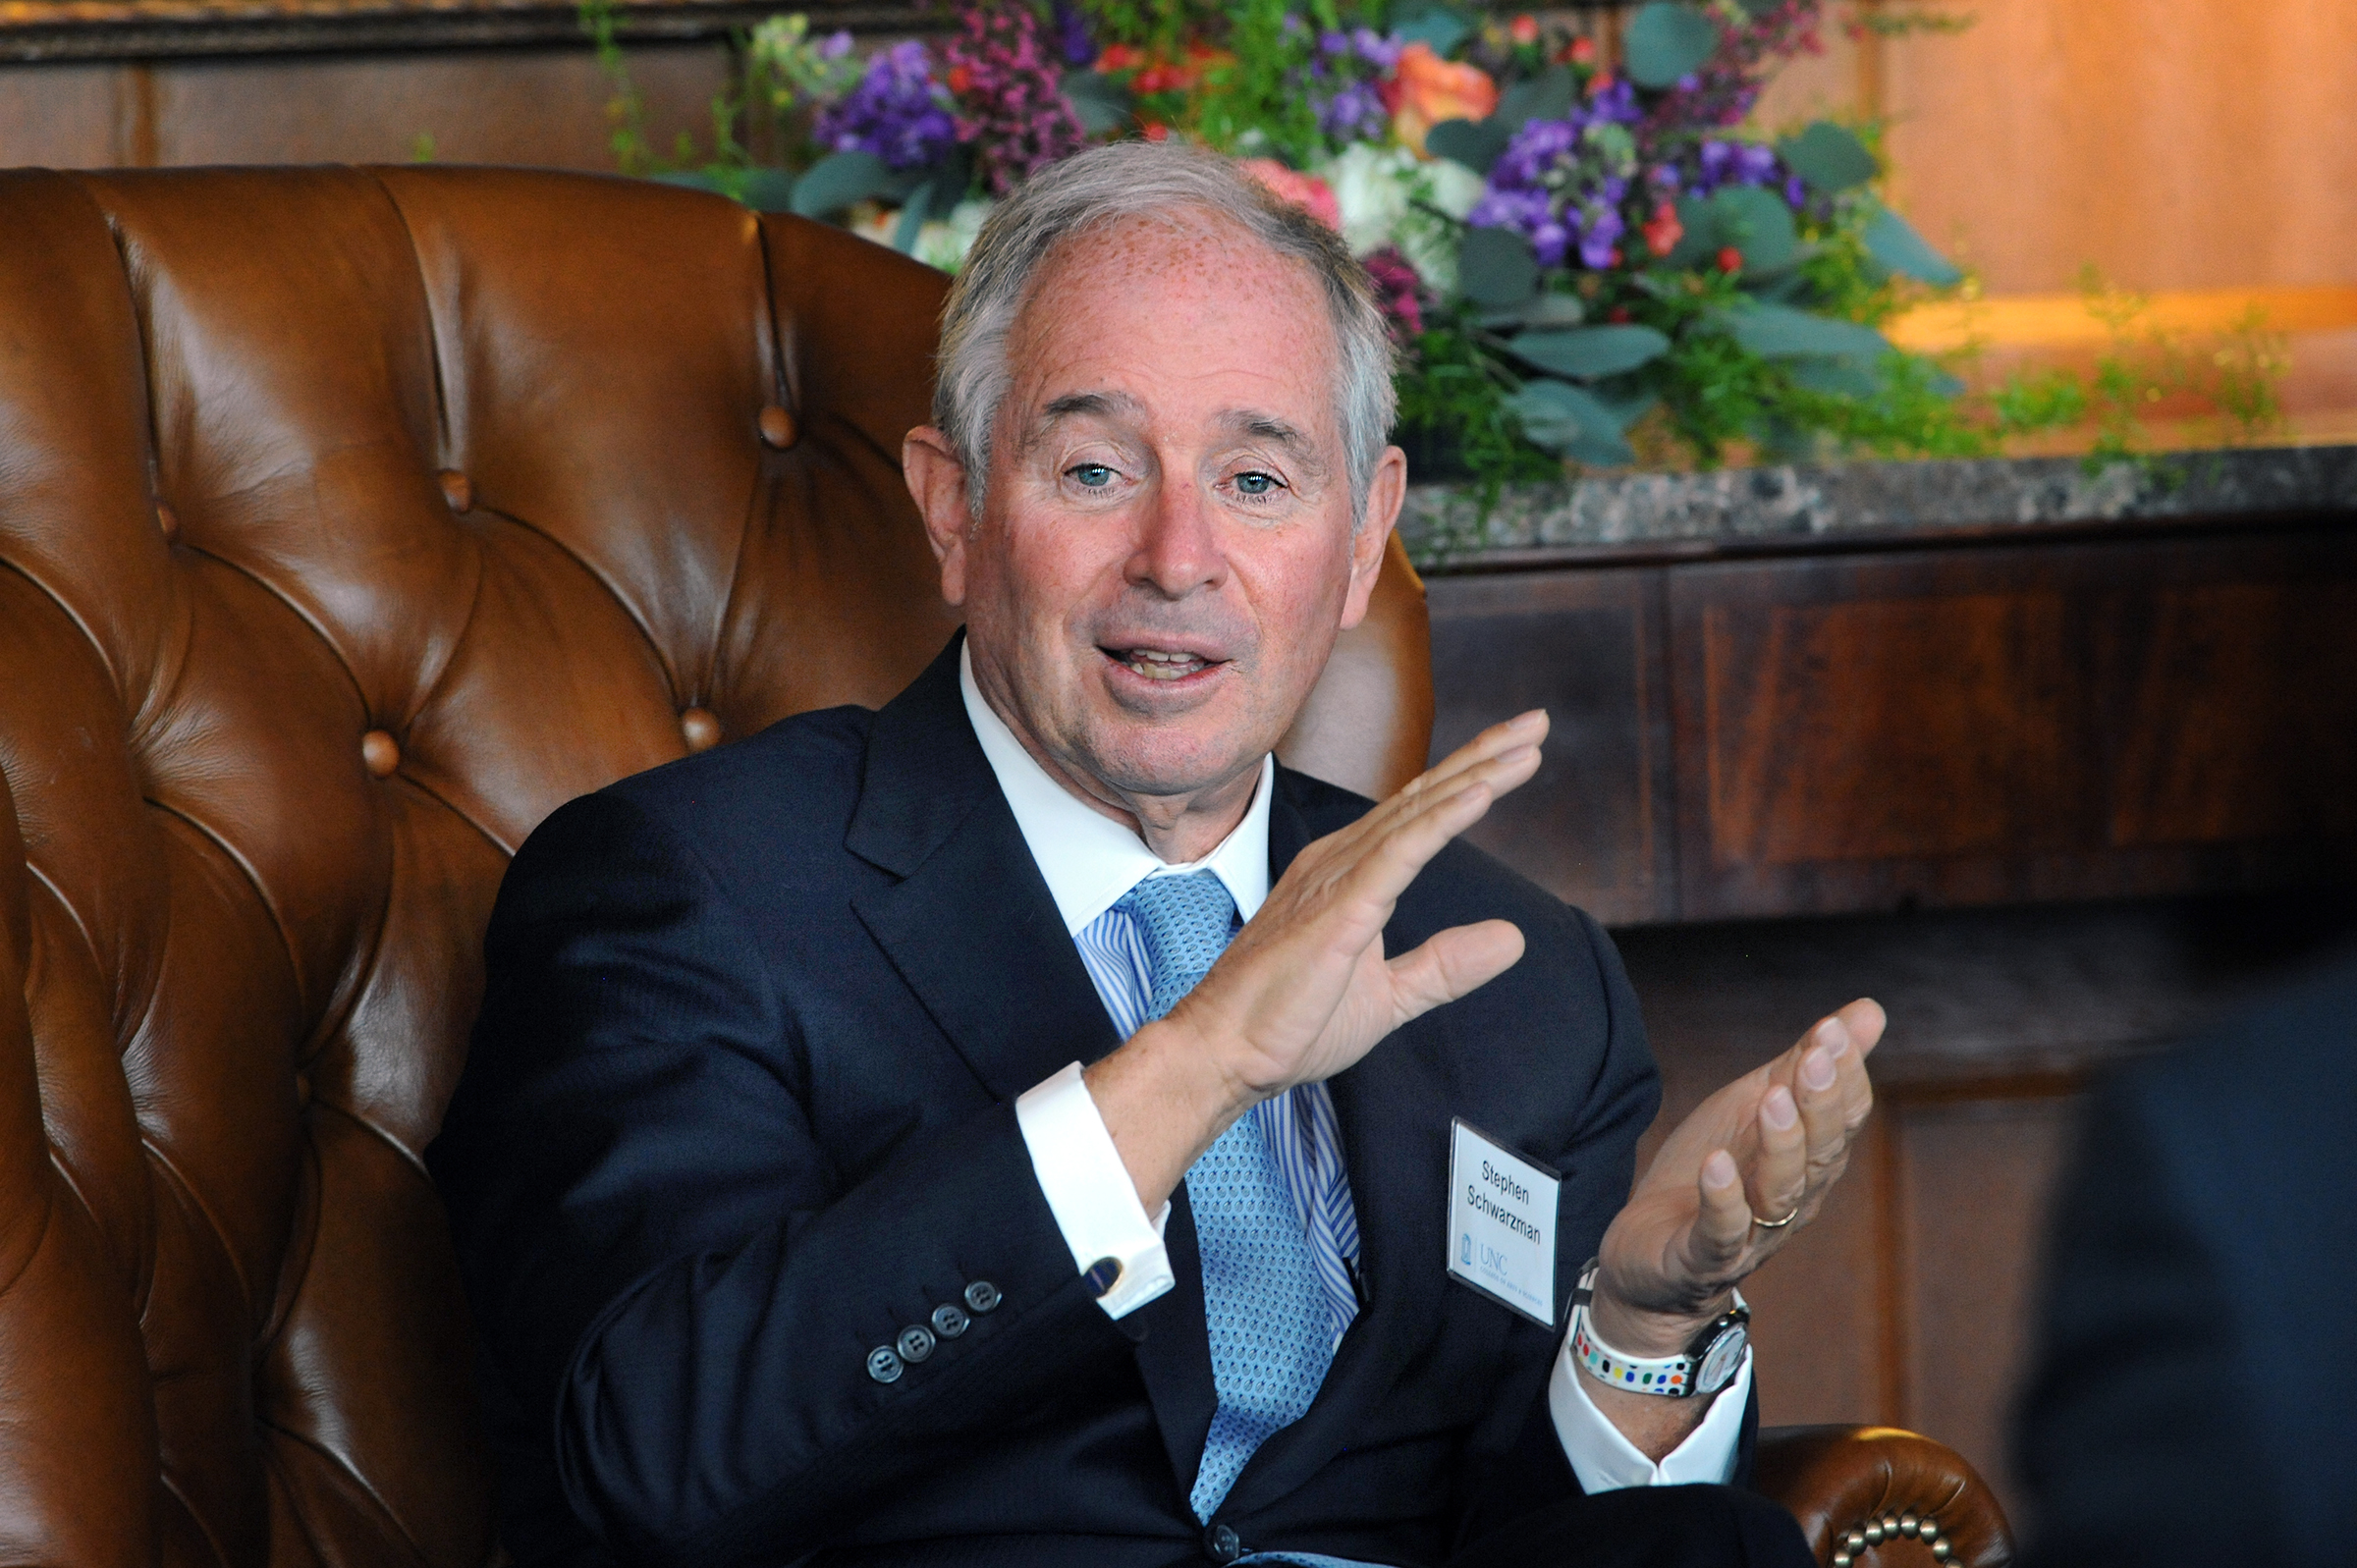 Stephen Schwarzman, CEO and co-founder of Blackstone, told Carolina students that his classic liberal arts education at Yale University profoundly shaped his career. (photo by Donn Young)